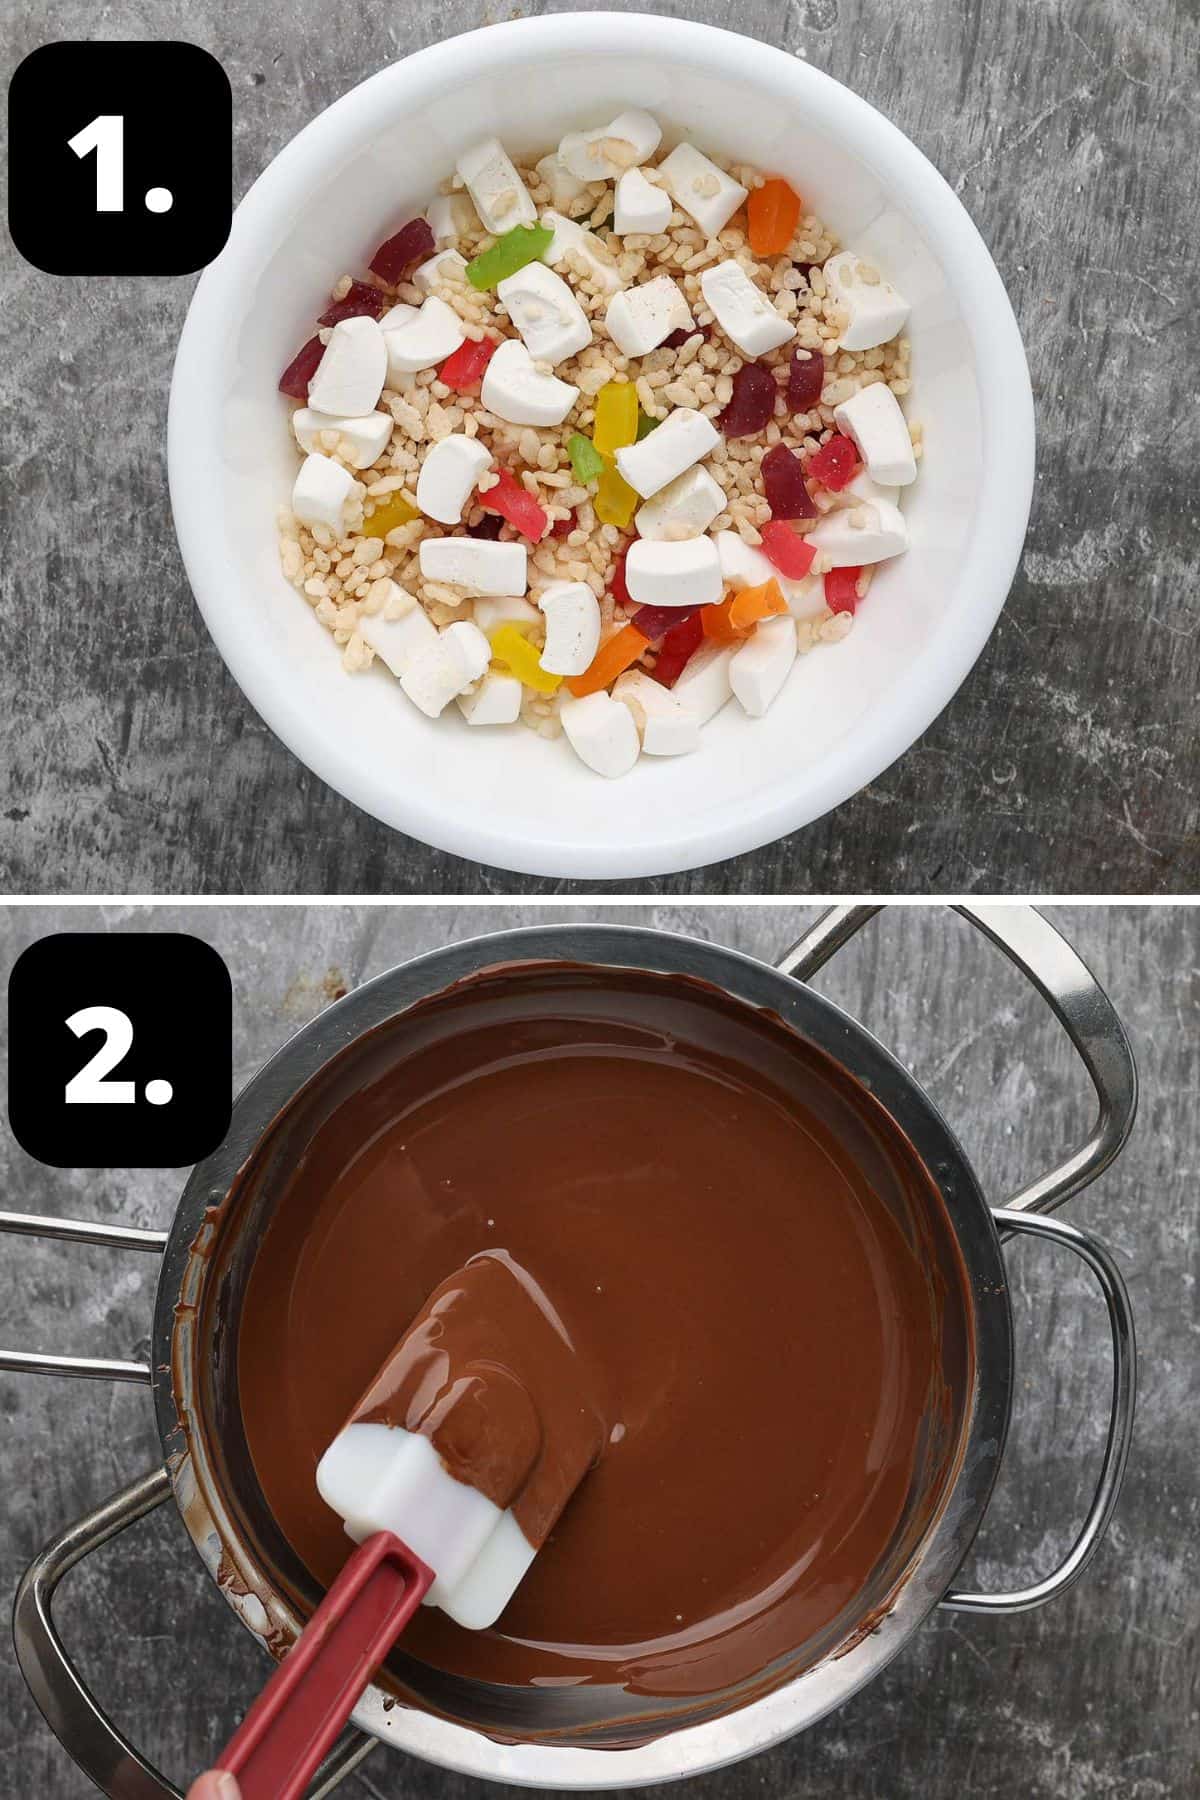 Steps 1-2 of preparing this recipe - the fillings in a bowl and melting the chocolate.